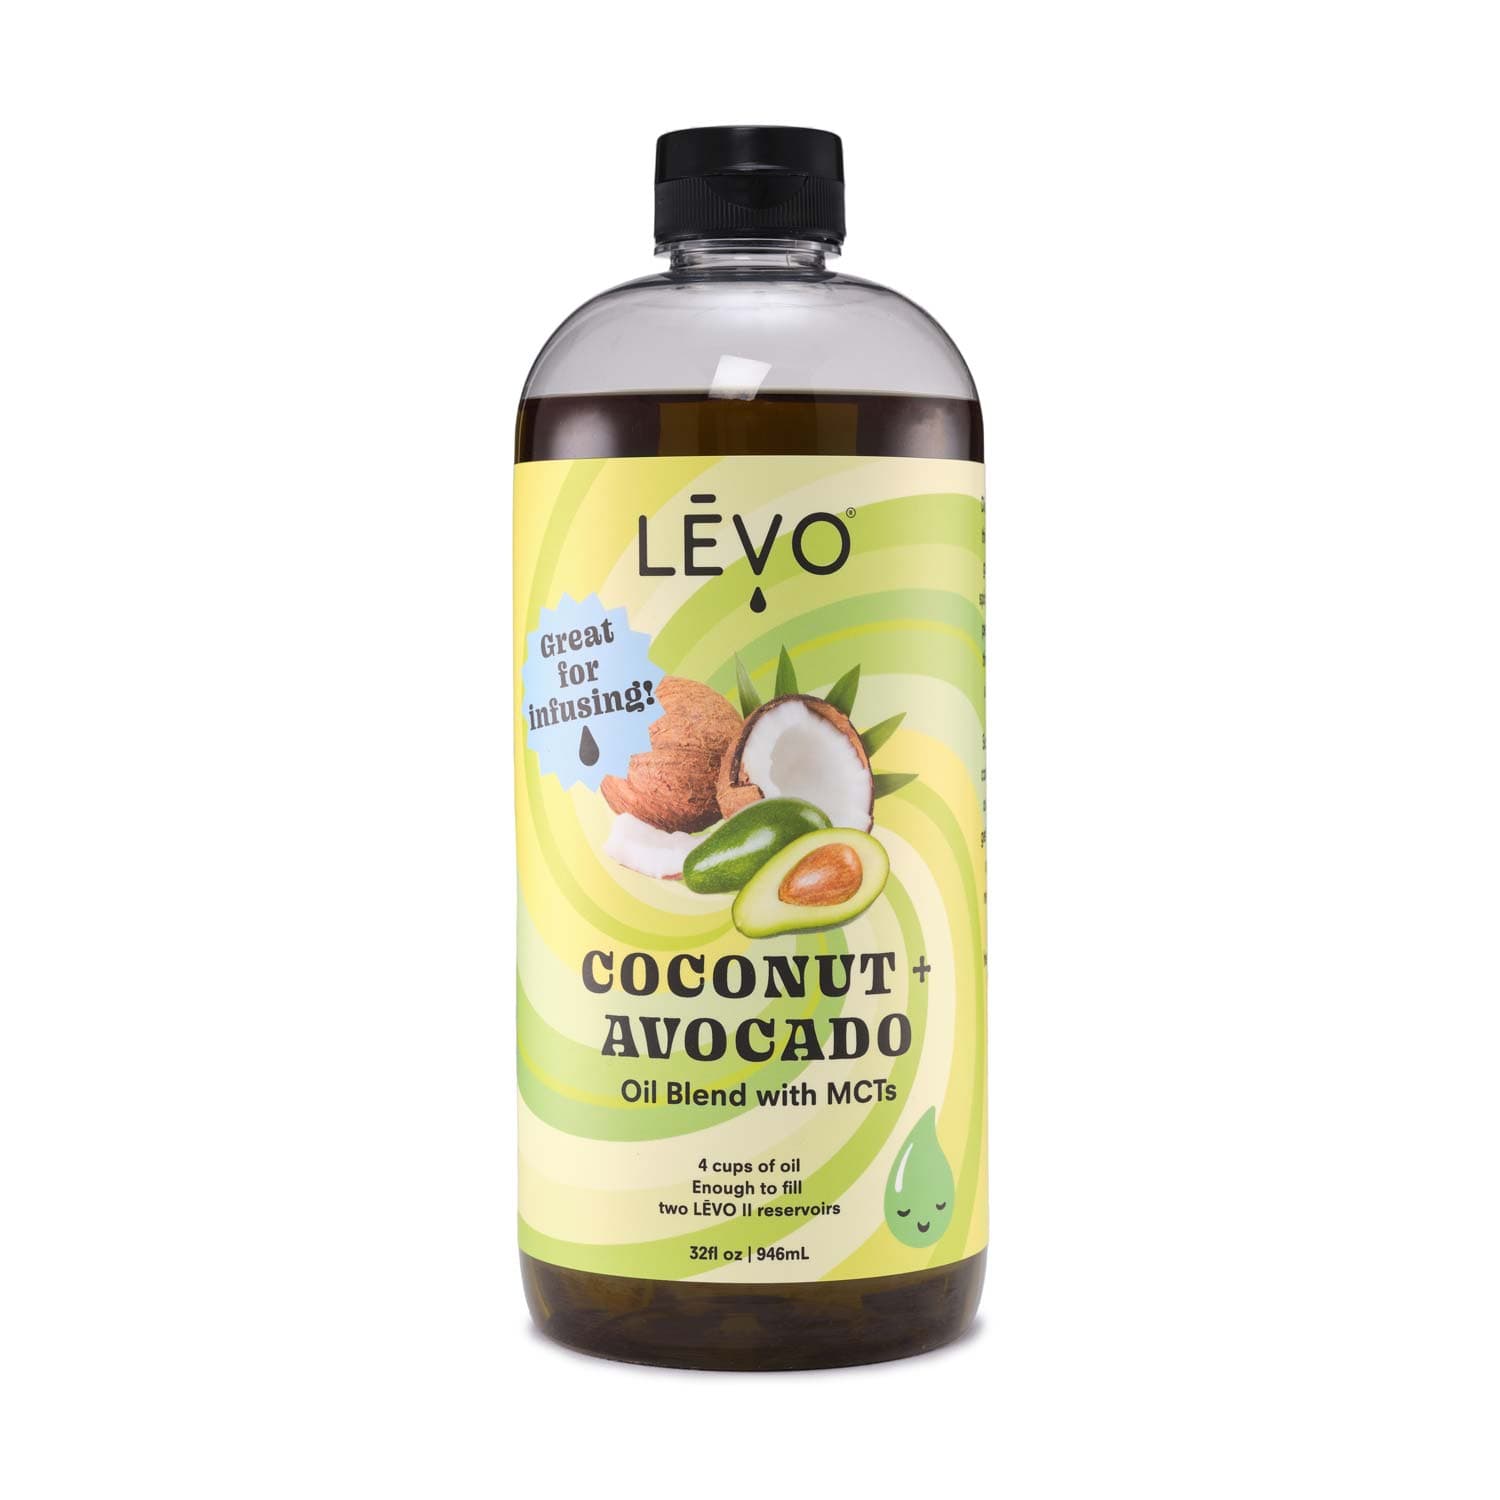 LEVO Coconut Avocado oil blend with MCTs. Premium LĒVO Coconut + Avocado Oil Blend: Perfect for high-heat infusions and culinary creations.